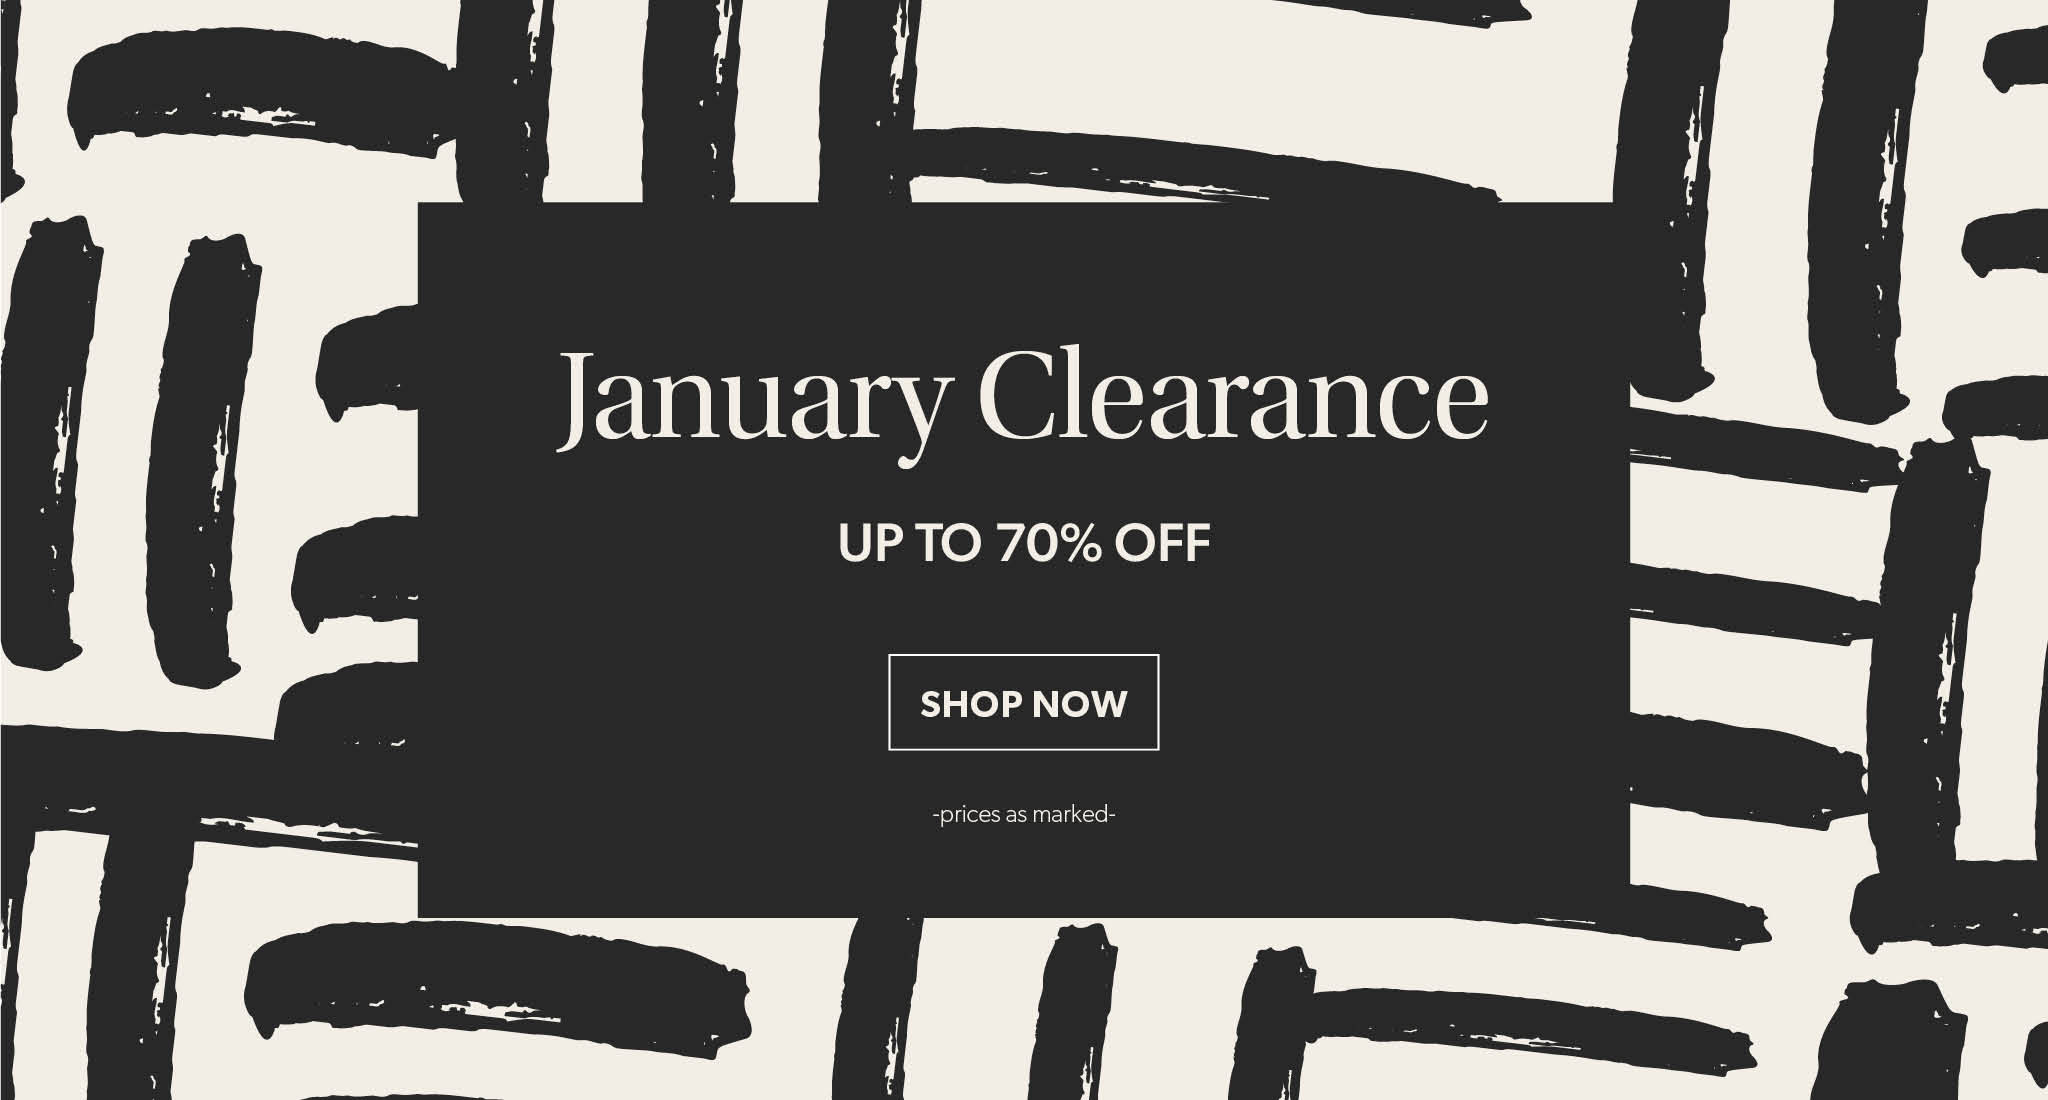 January Clearance - Up to 70% Off - Shop Now